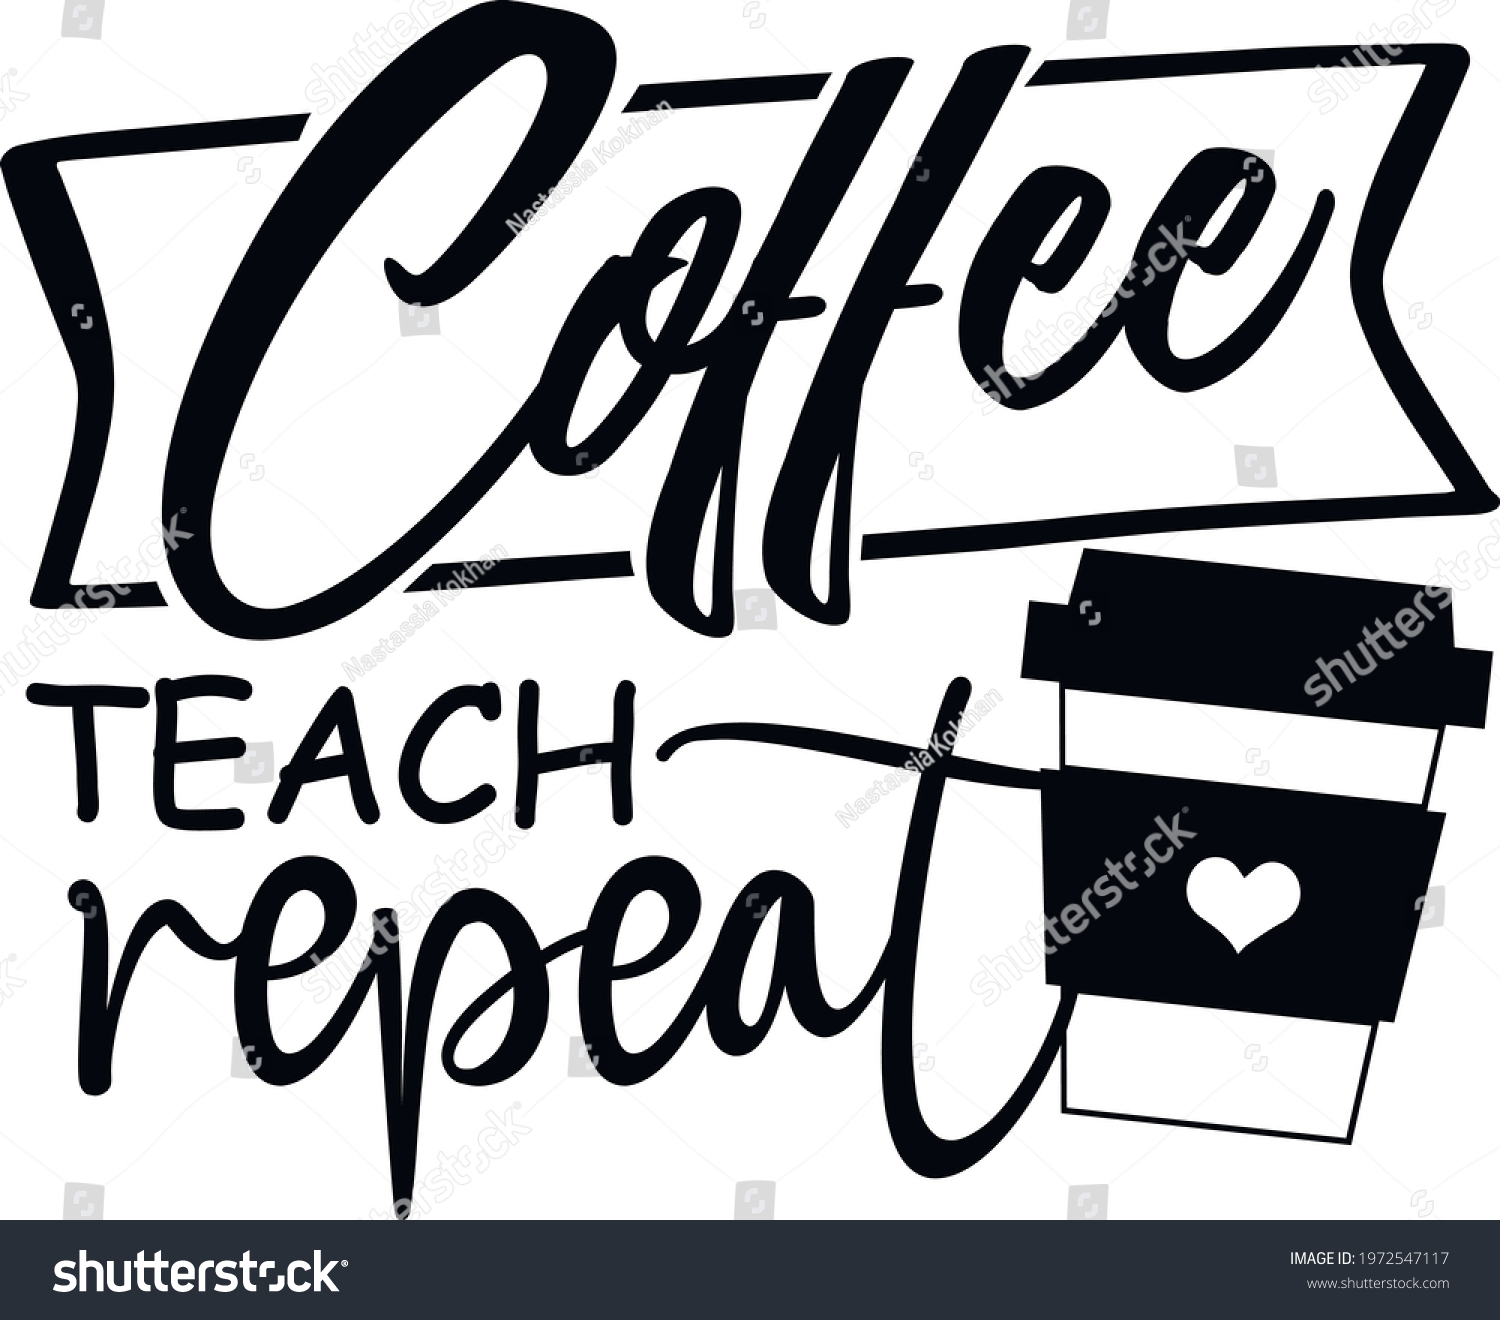 SVG of Coffee teach repeat svg vector Illustration isolated on white background. Teacher shirt design with coffee. svg